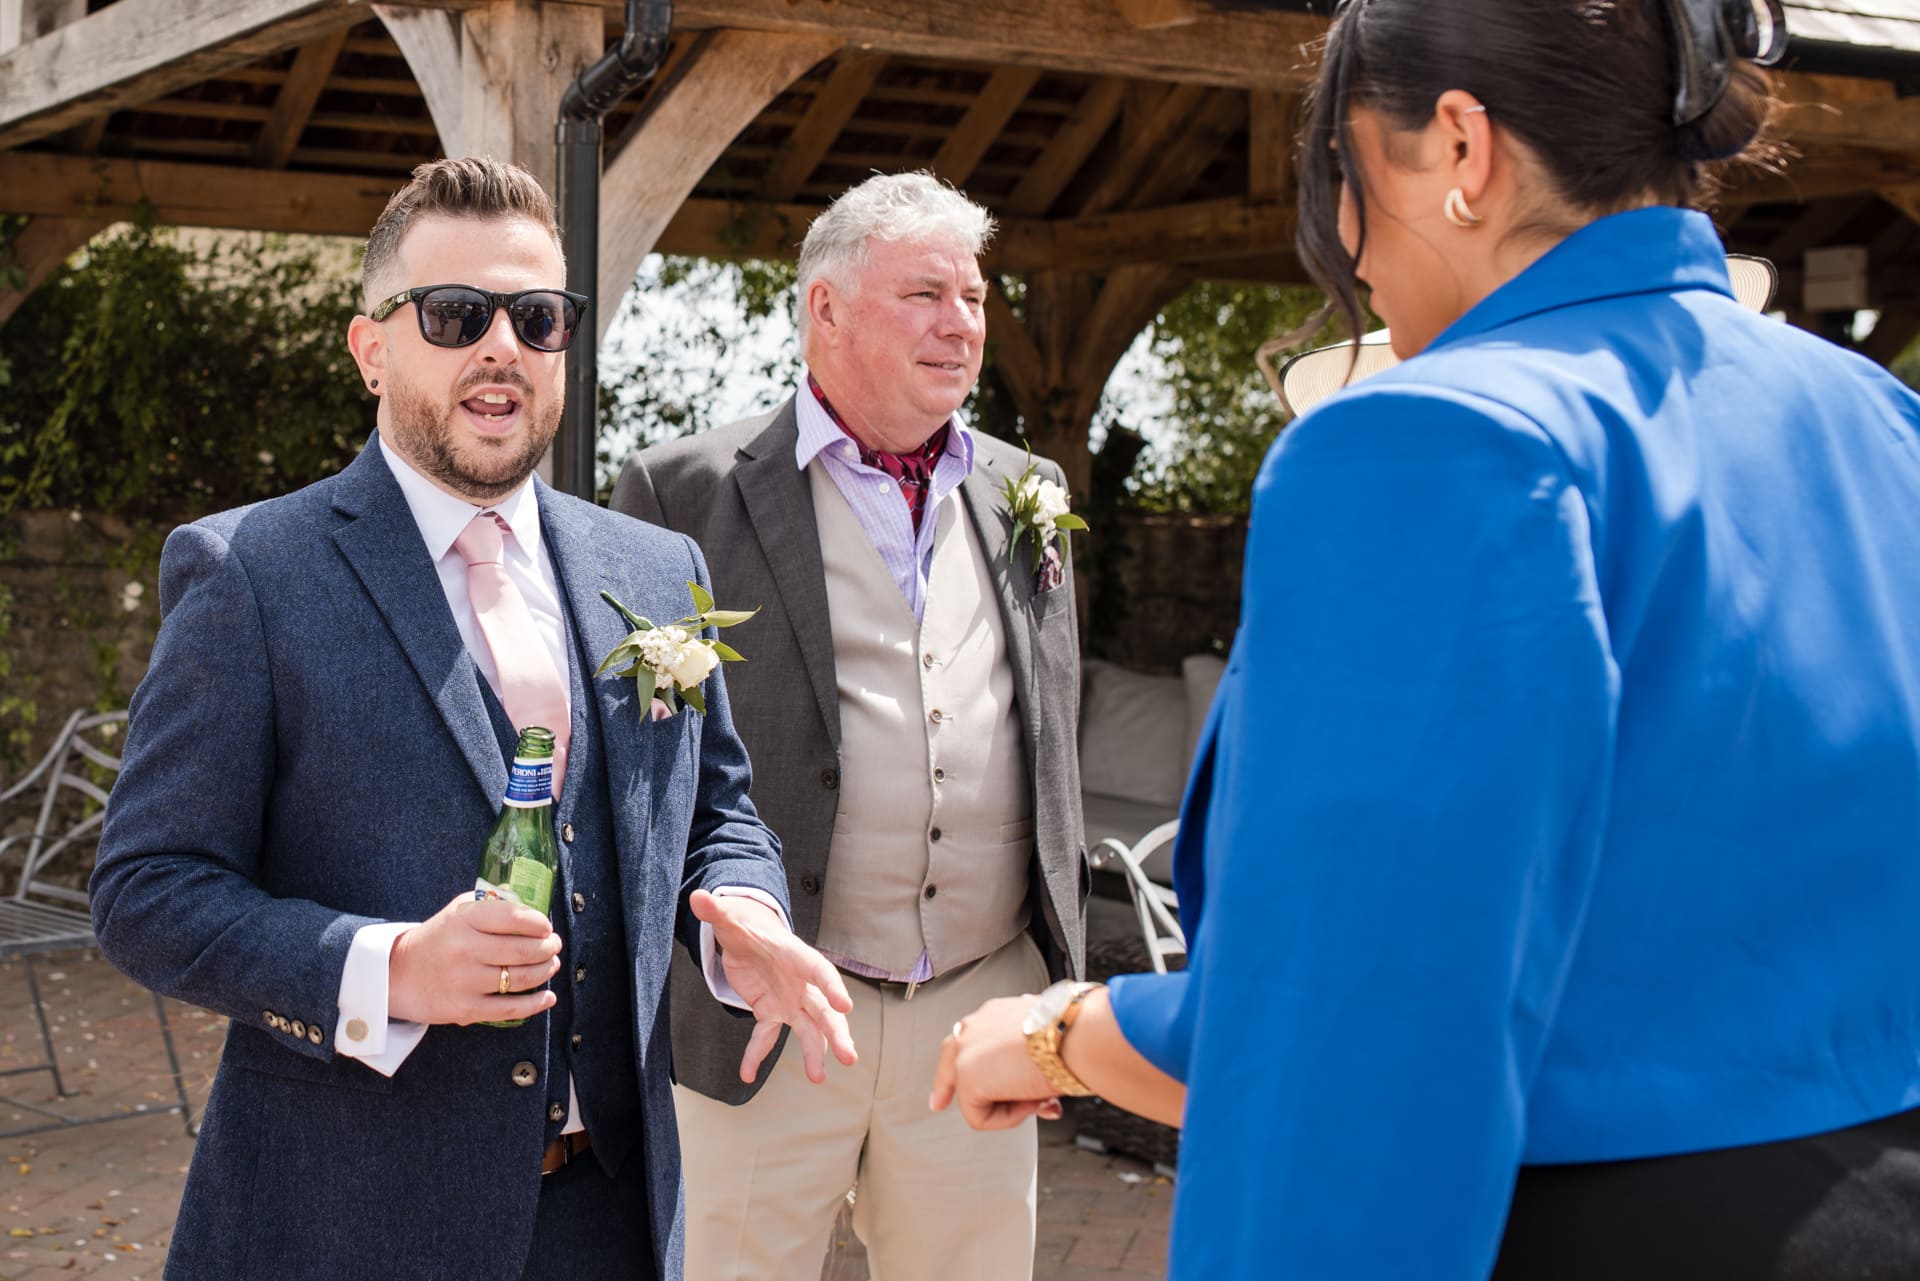 Groom talking to guests